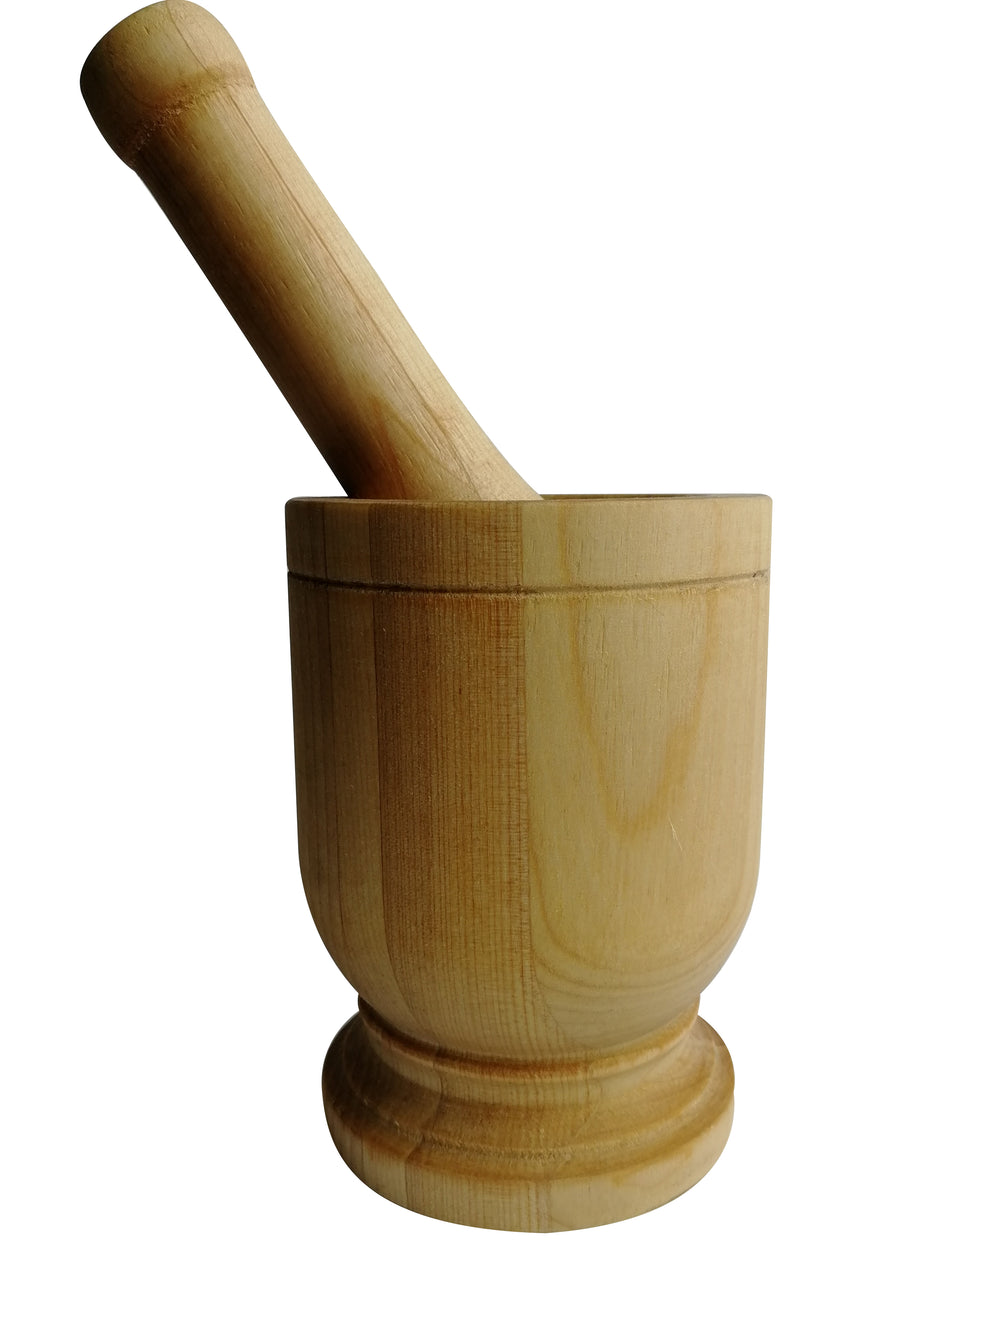 Bene Casa wooden mortar and pestle, 5.2-inches high, easy to use guacamole maker